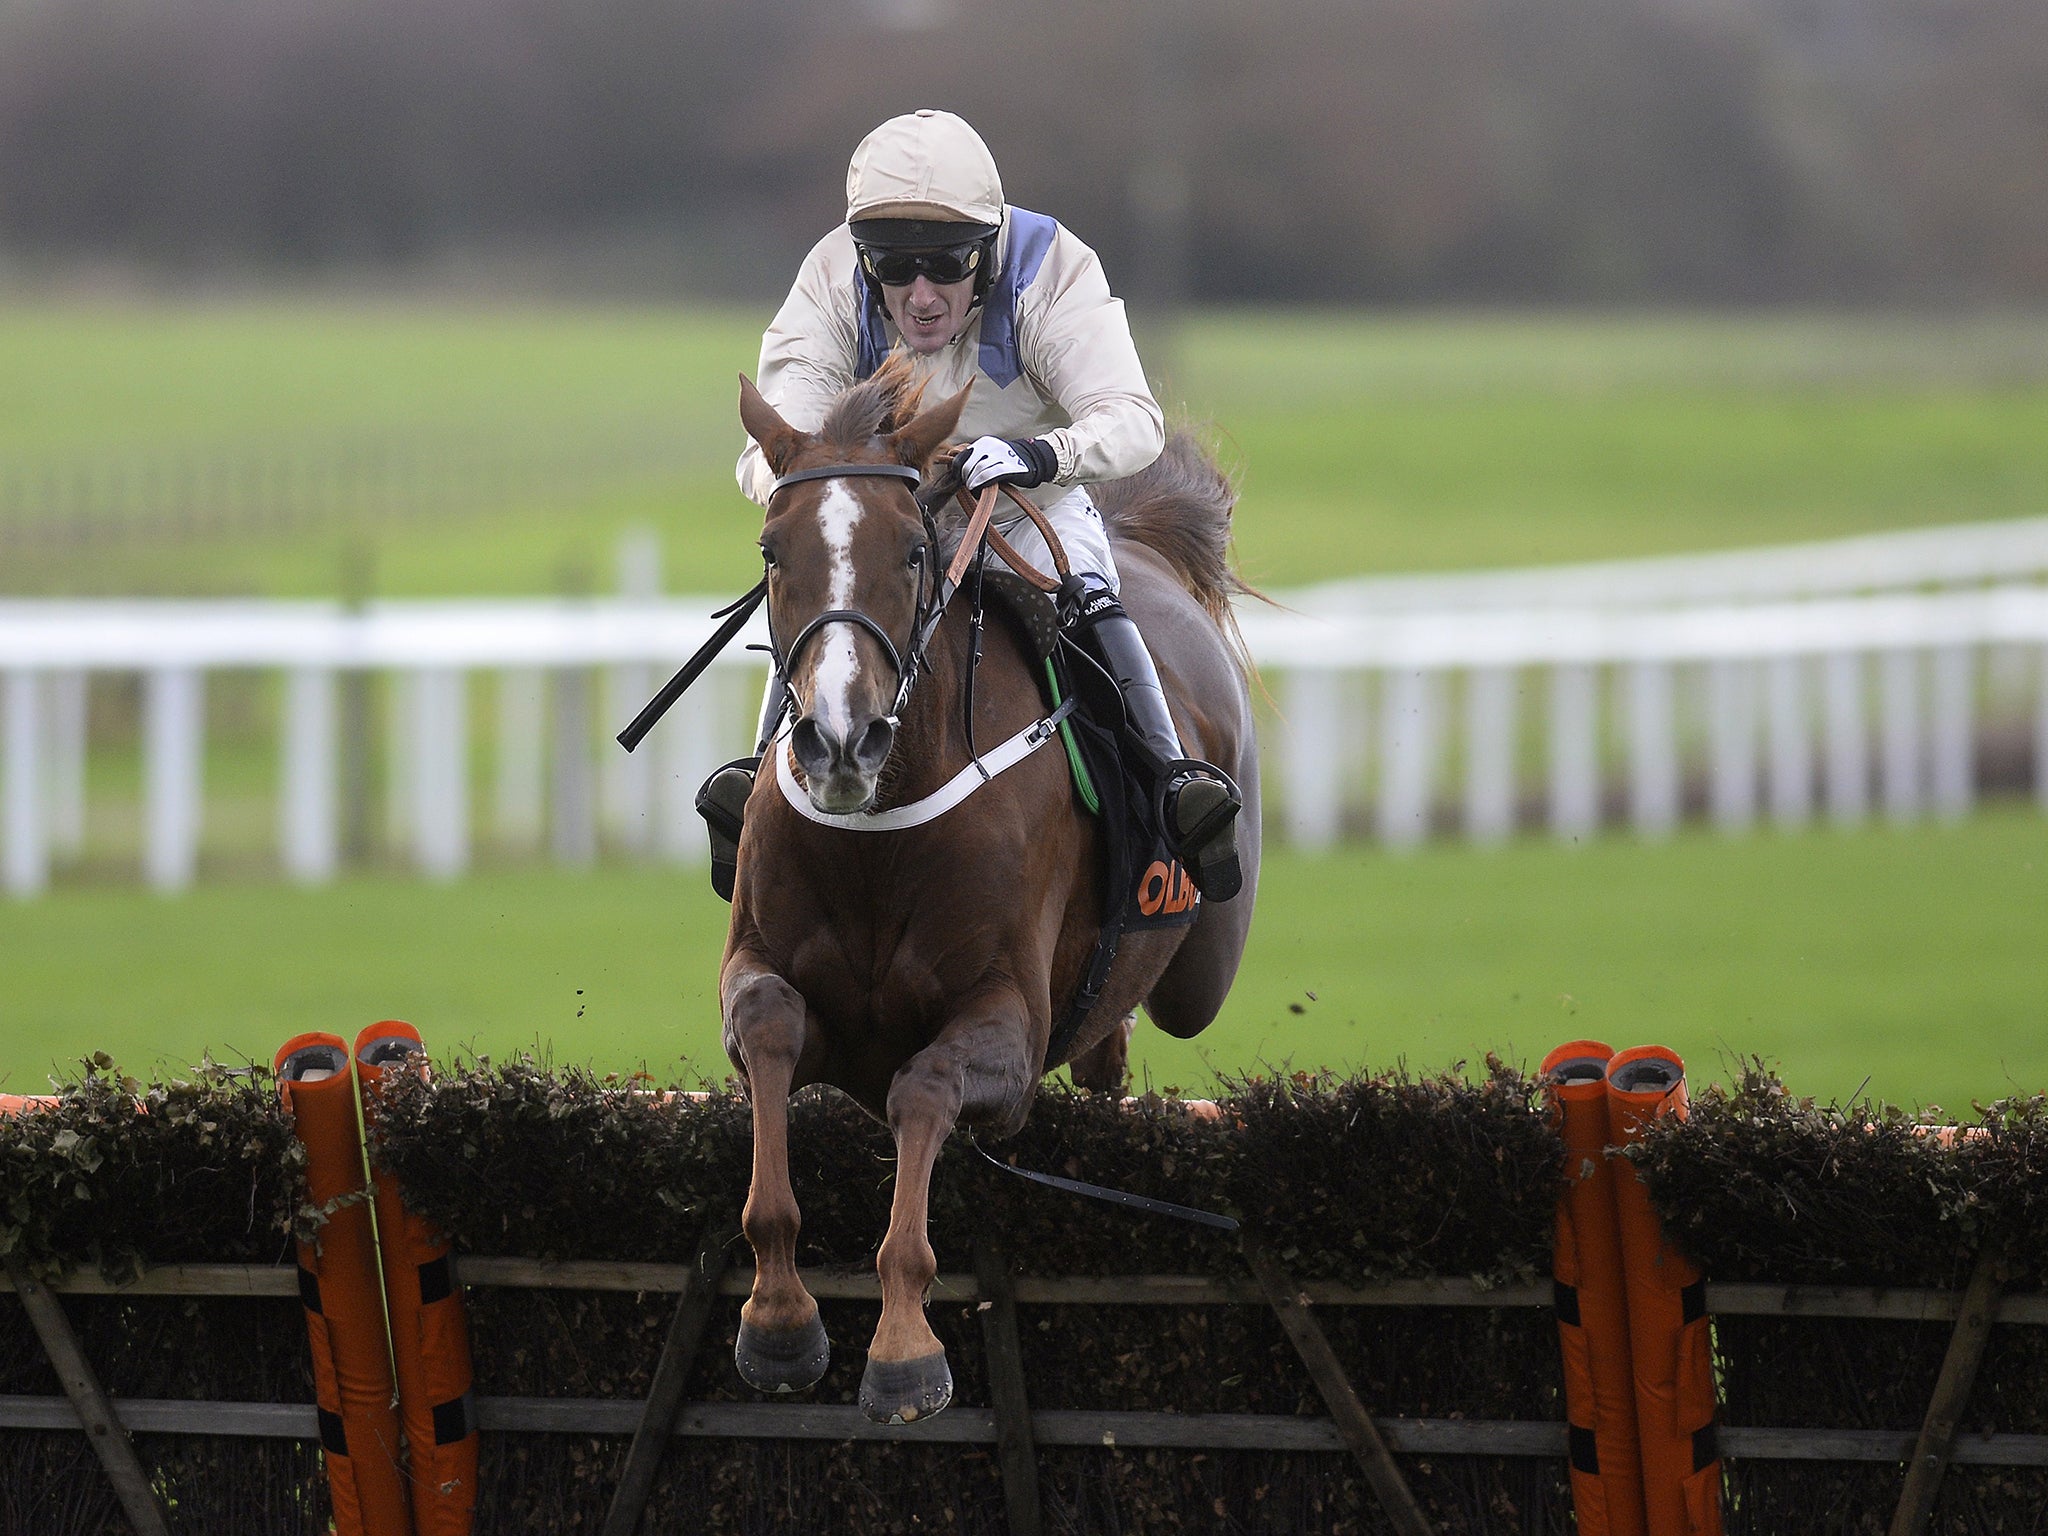 Aurore D’Estruval, the smooth winner of a Listed mares’ hurdle at Wetherby in November, is fancied to land a similar contest at Sandown this afternoon